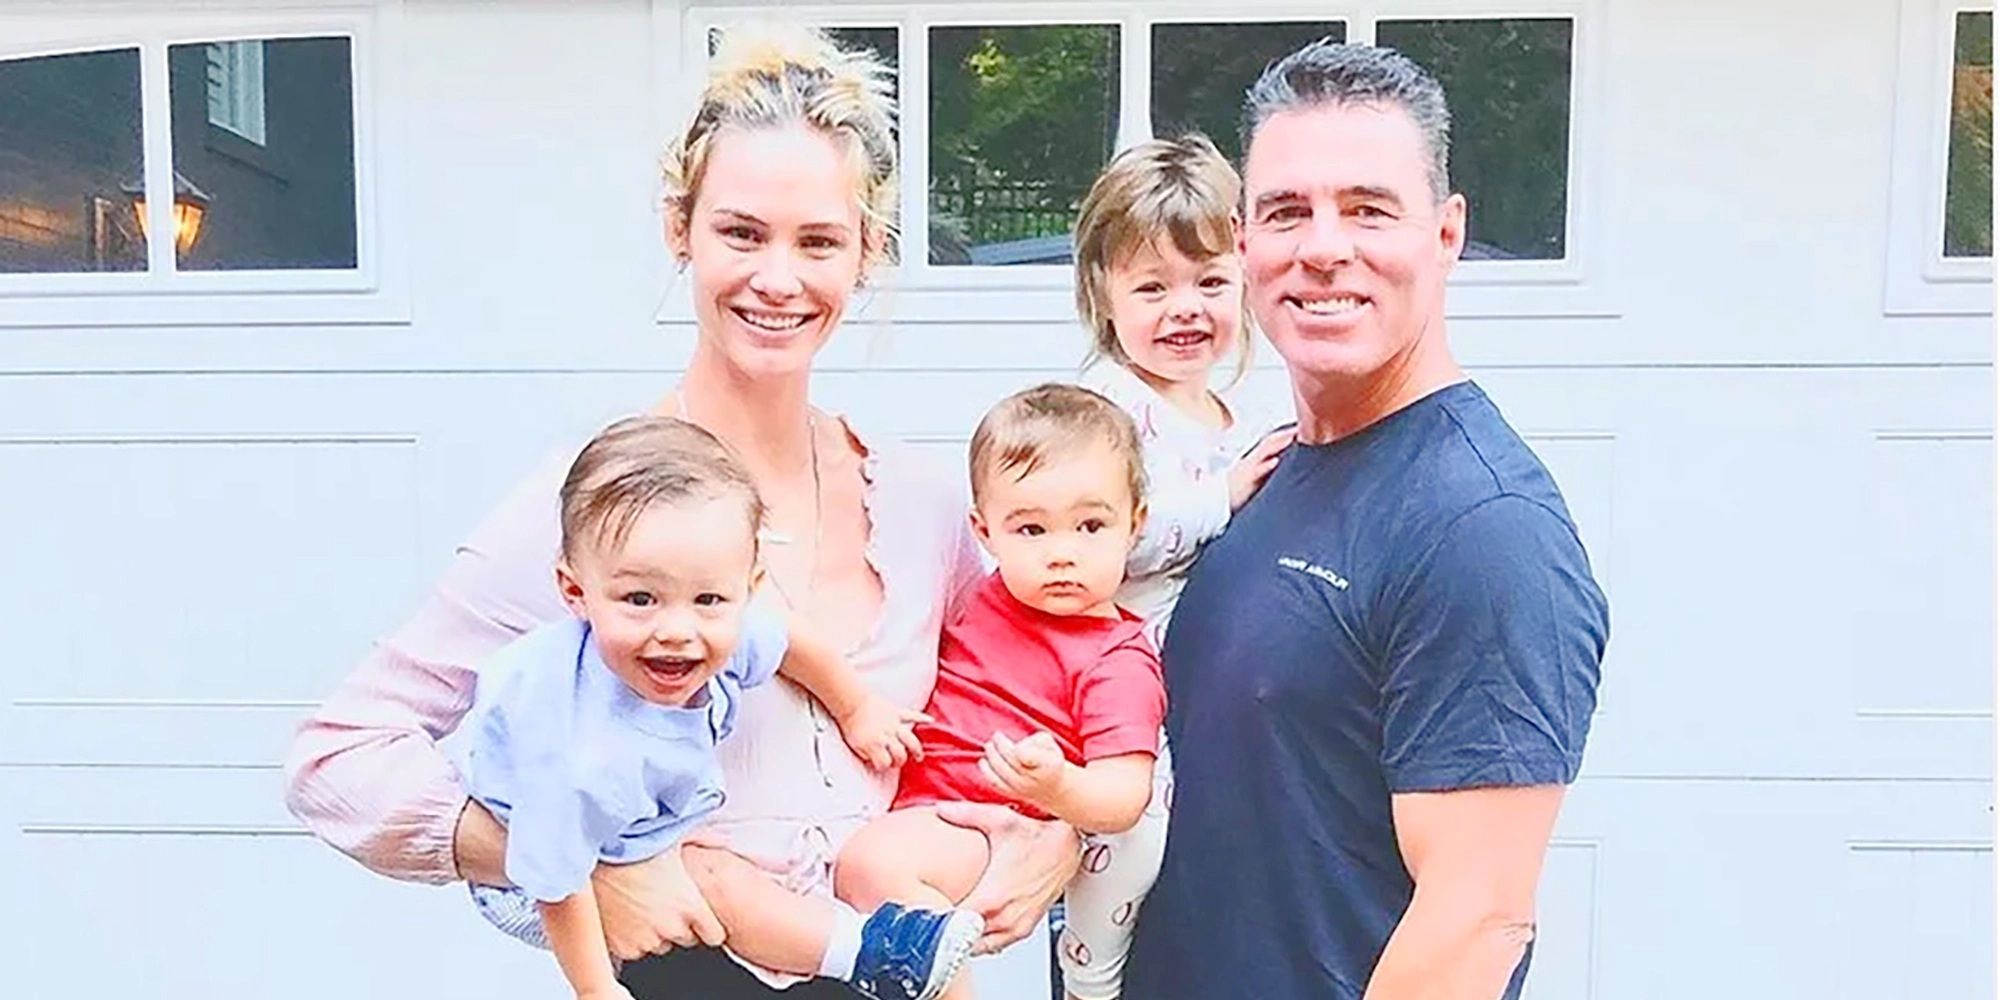 Real Housewives of Orange County's Meghan King and Jim Edmonds with their kids